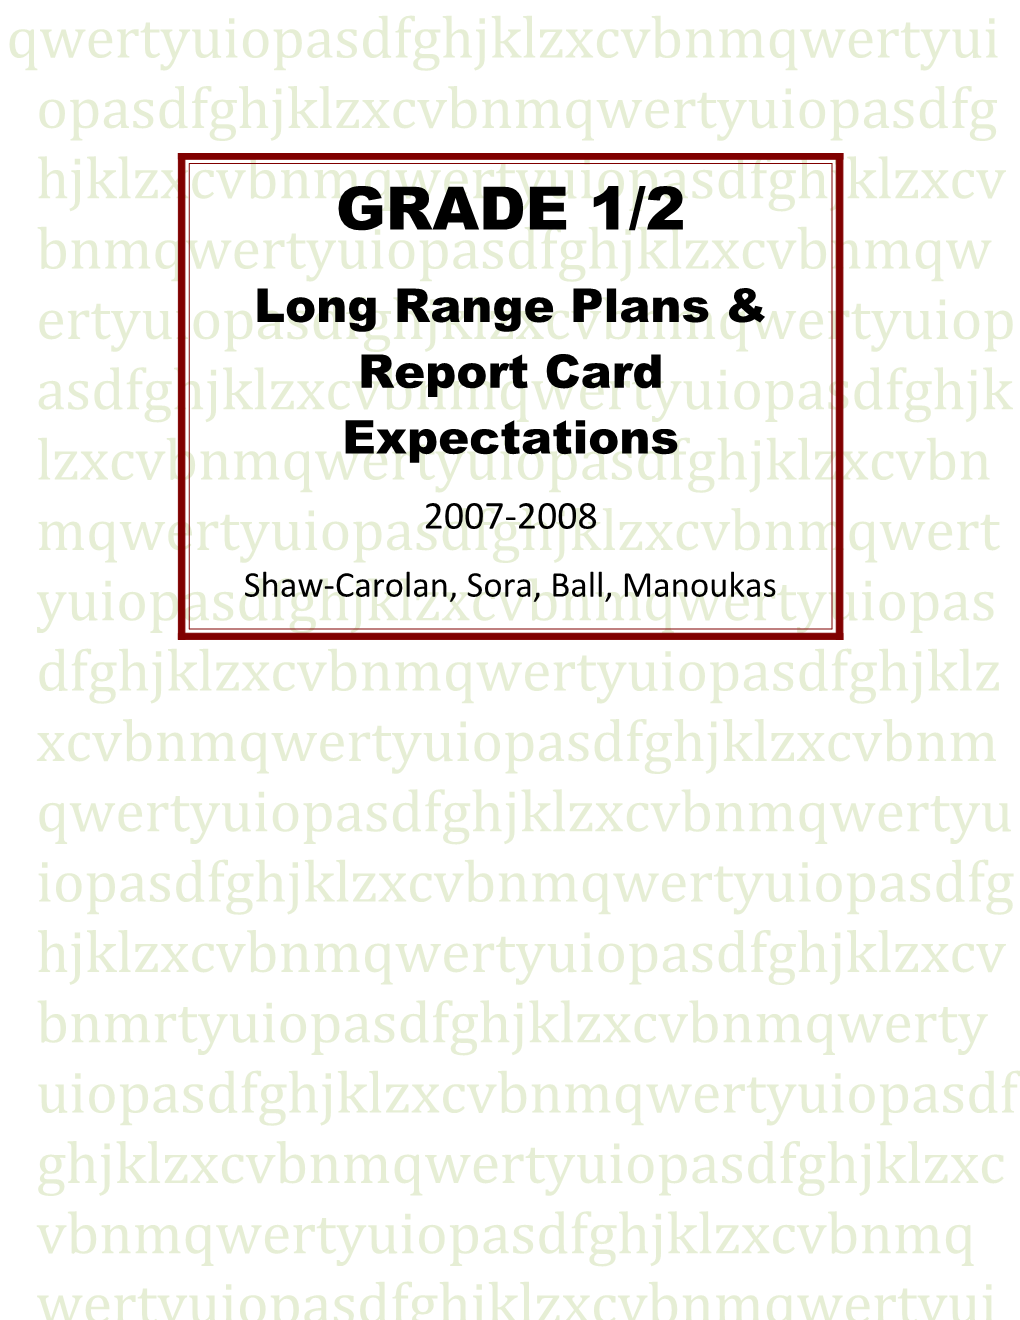 Grade 1/2 Report Card Expectations (2007-2008)